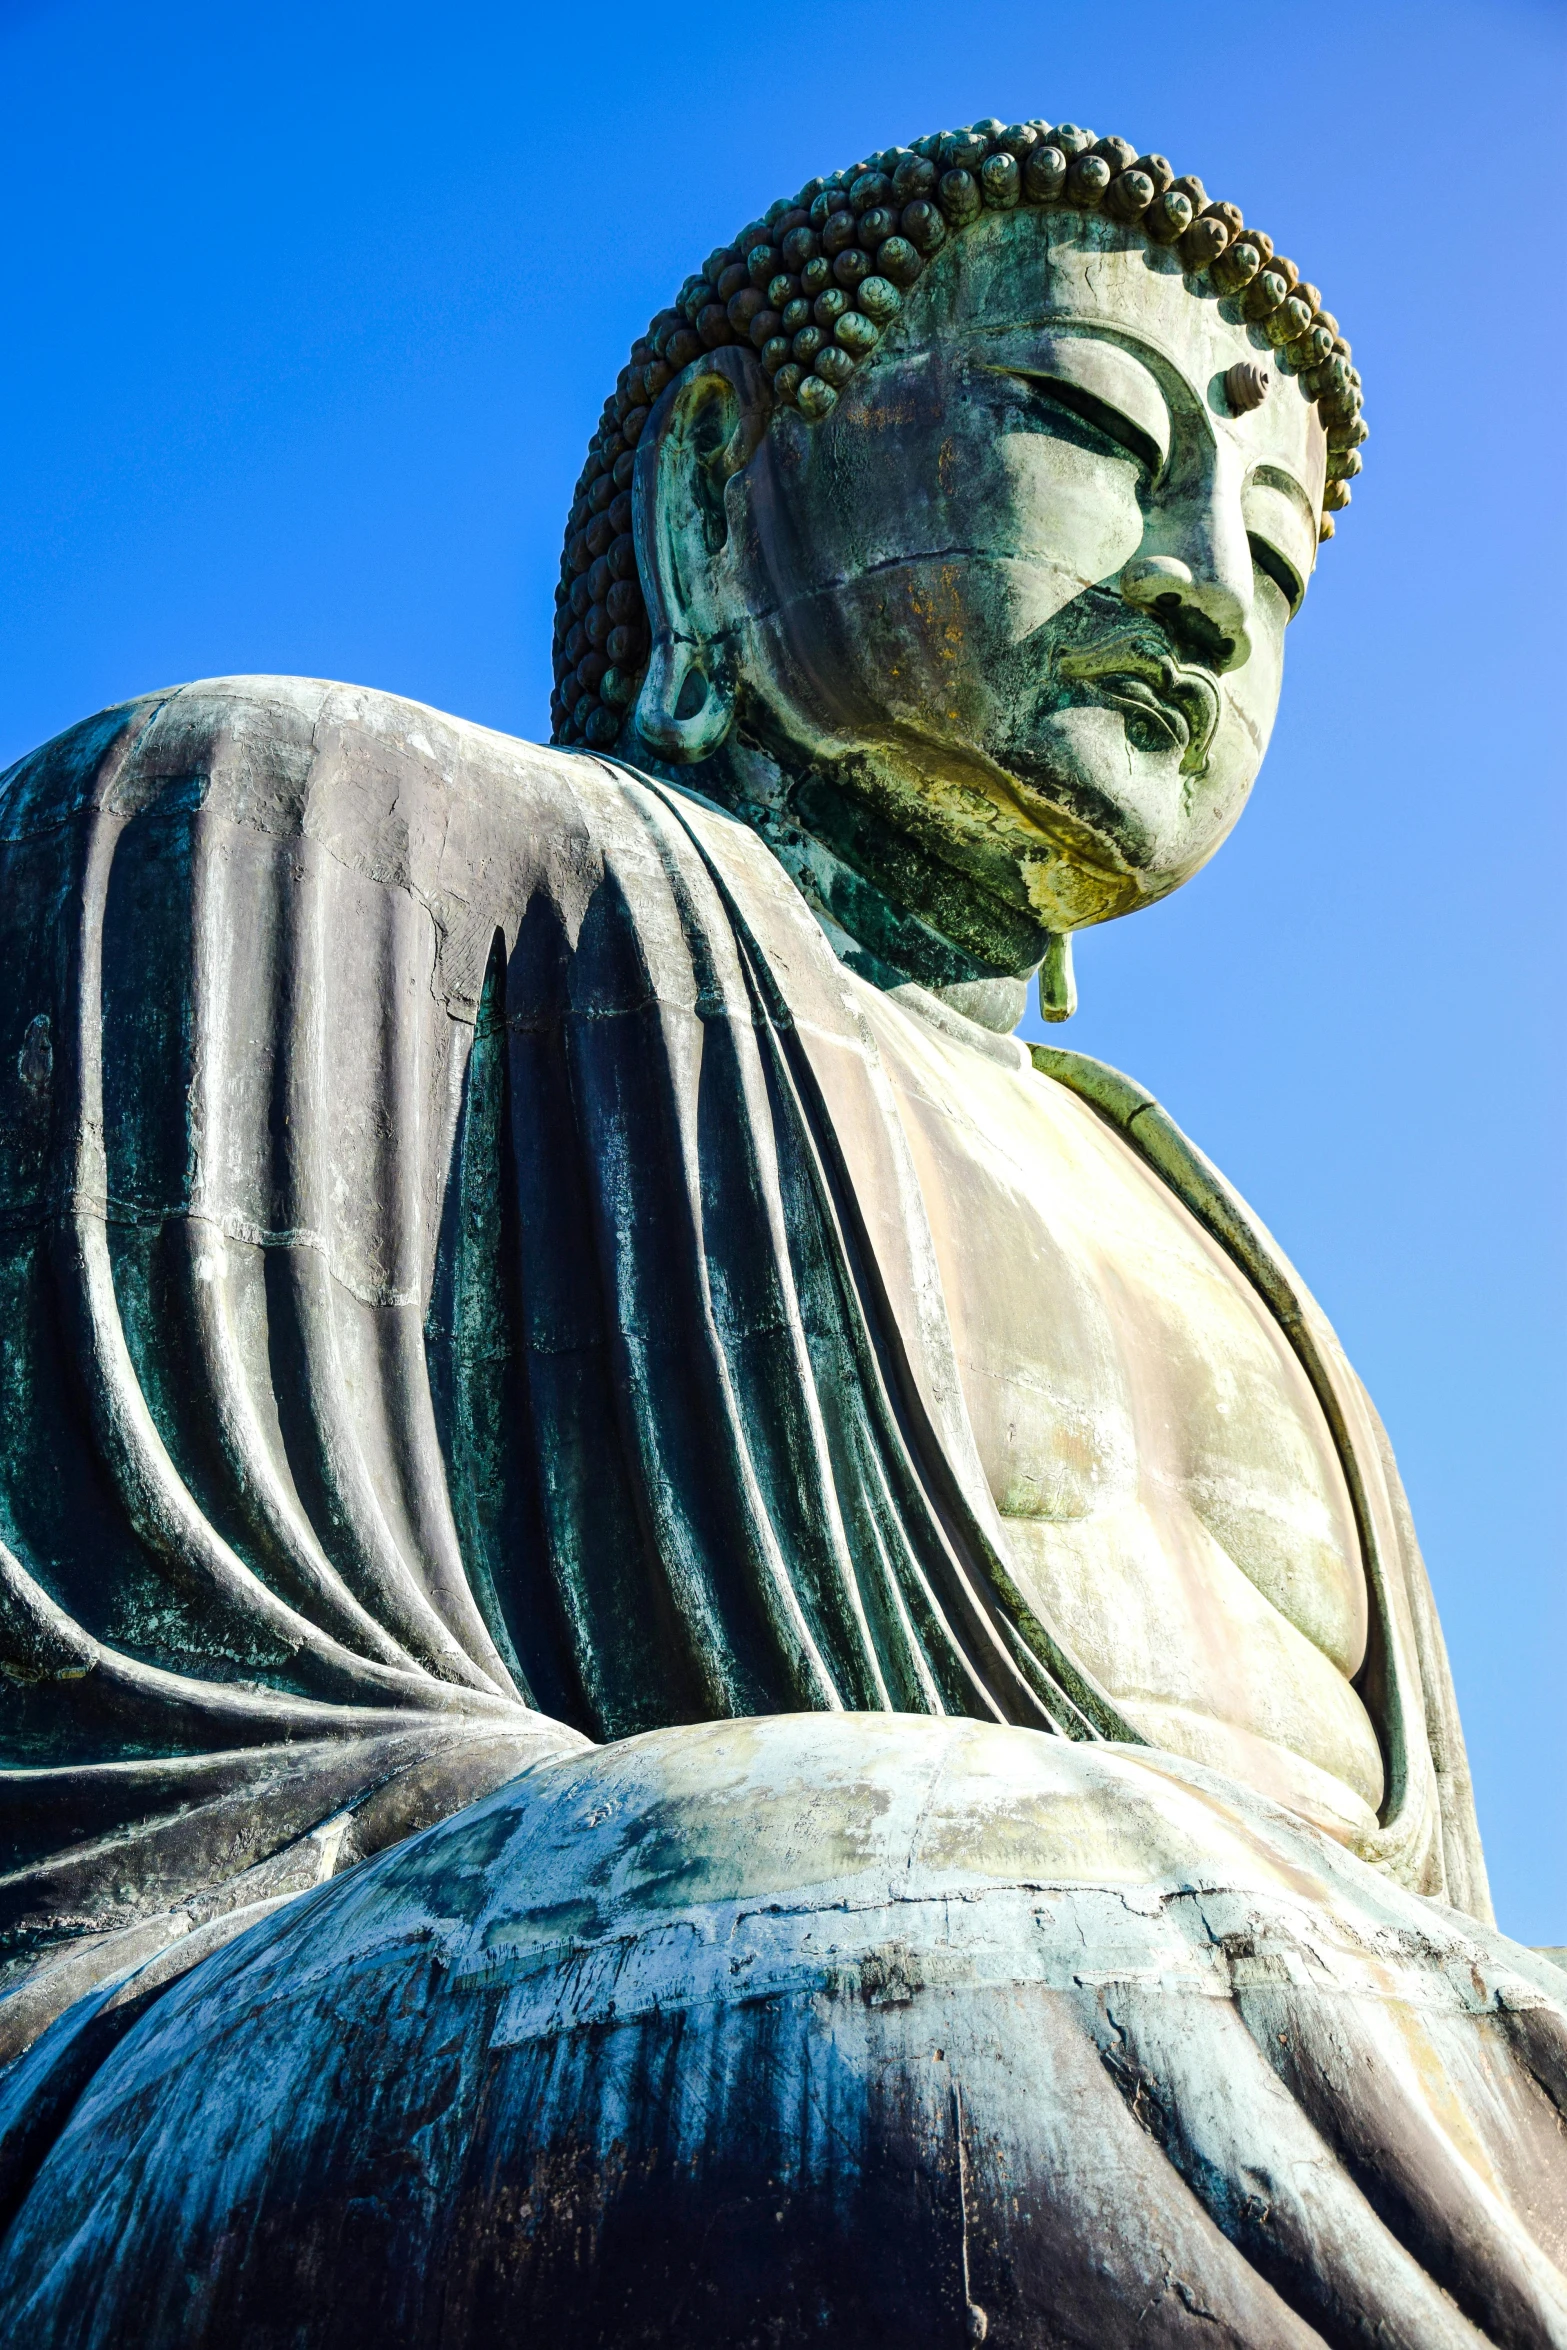 the big buddha statue is posed against a blue sky